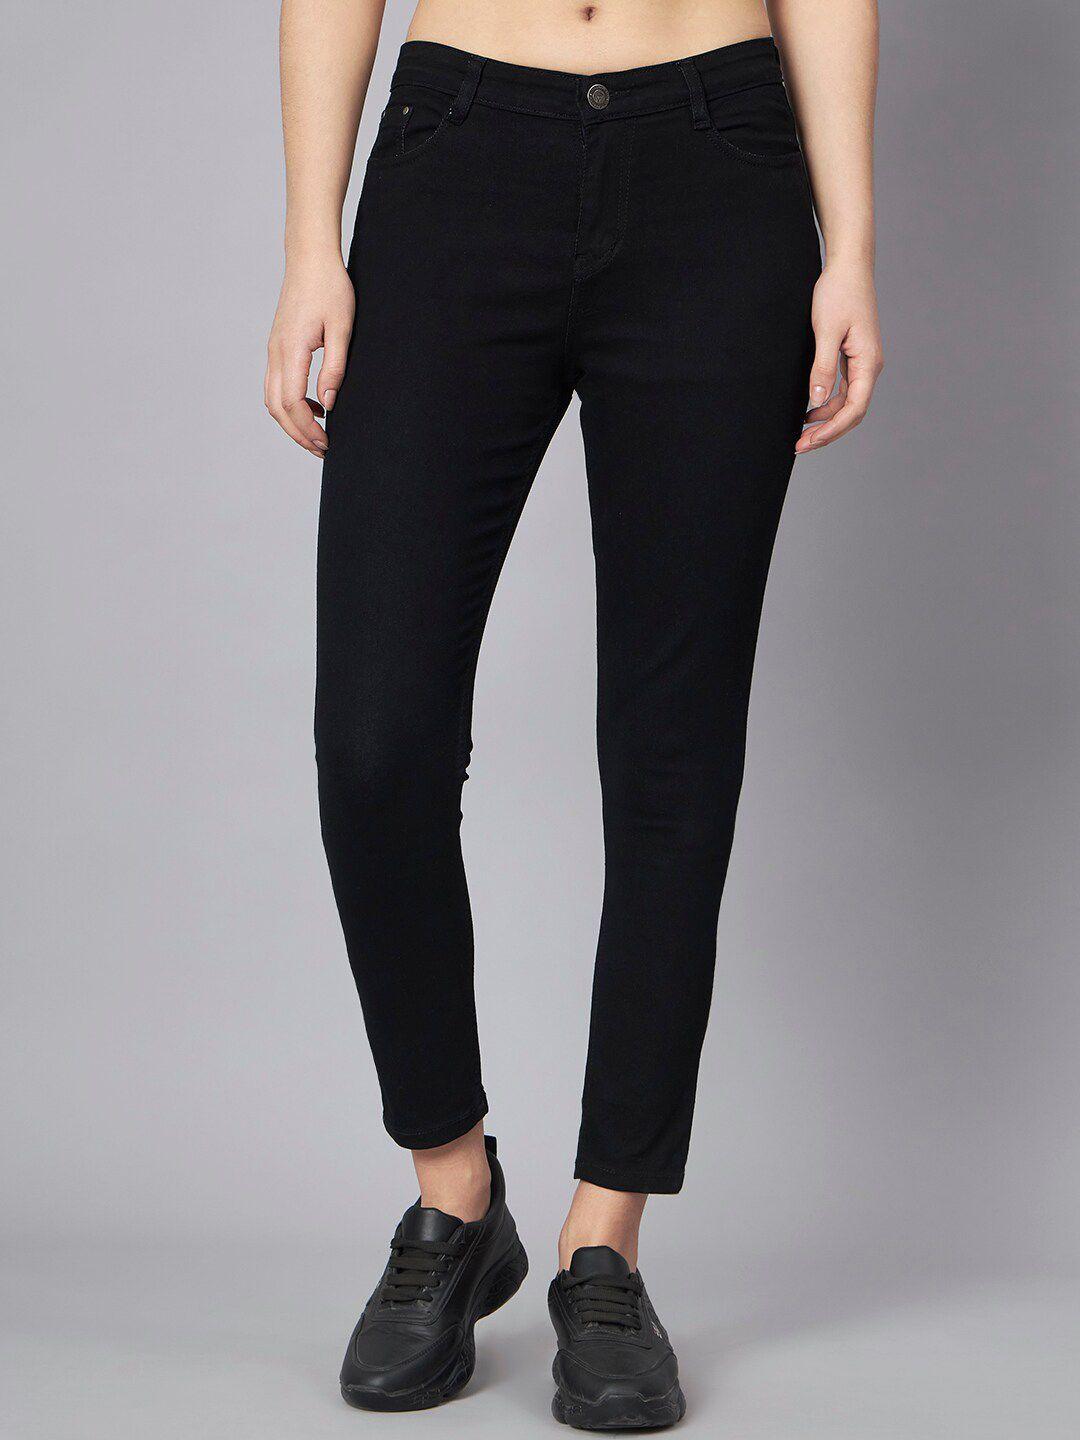 the dry state women black slim fit mid rise non stretchable cotton jeans